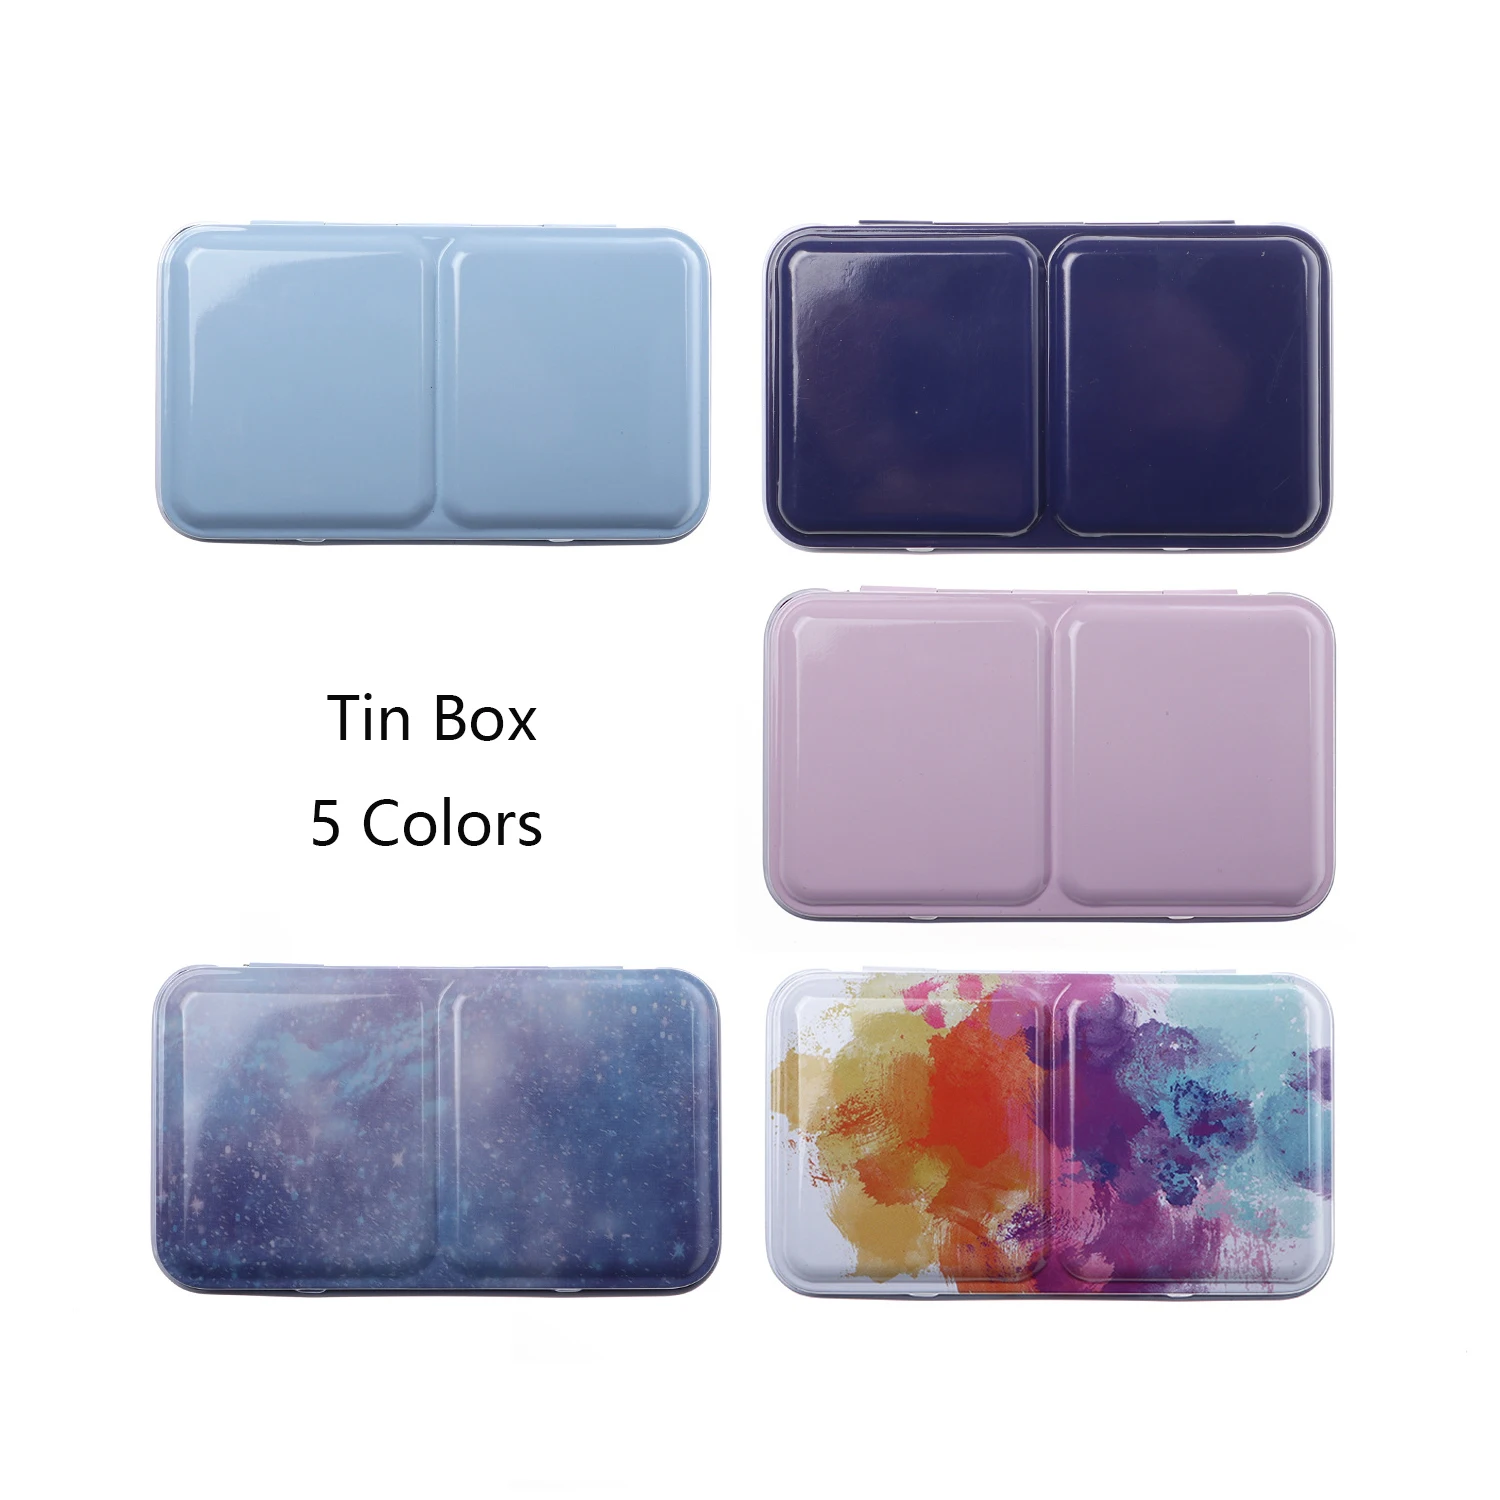 

24/48 Grids Starry Empty Palette Painting Storage Iron Tins Paint Tray Box with Half Pans For Watercolor/Oil/ Acrylic Paints